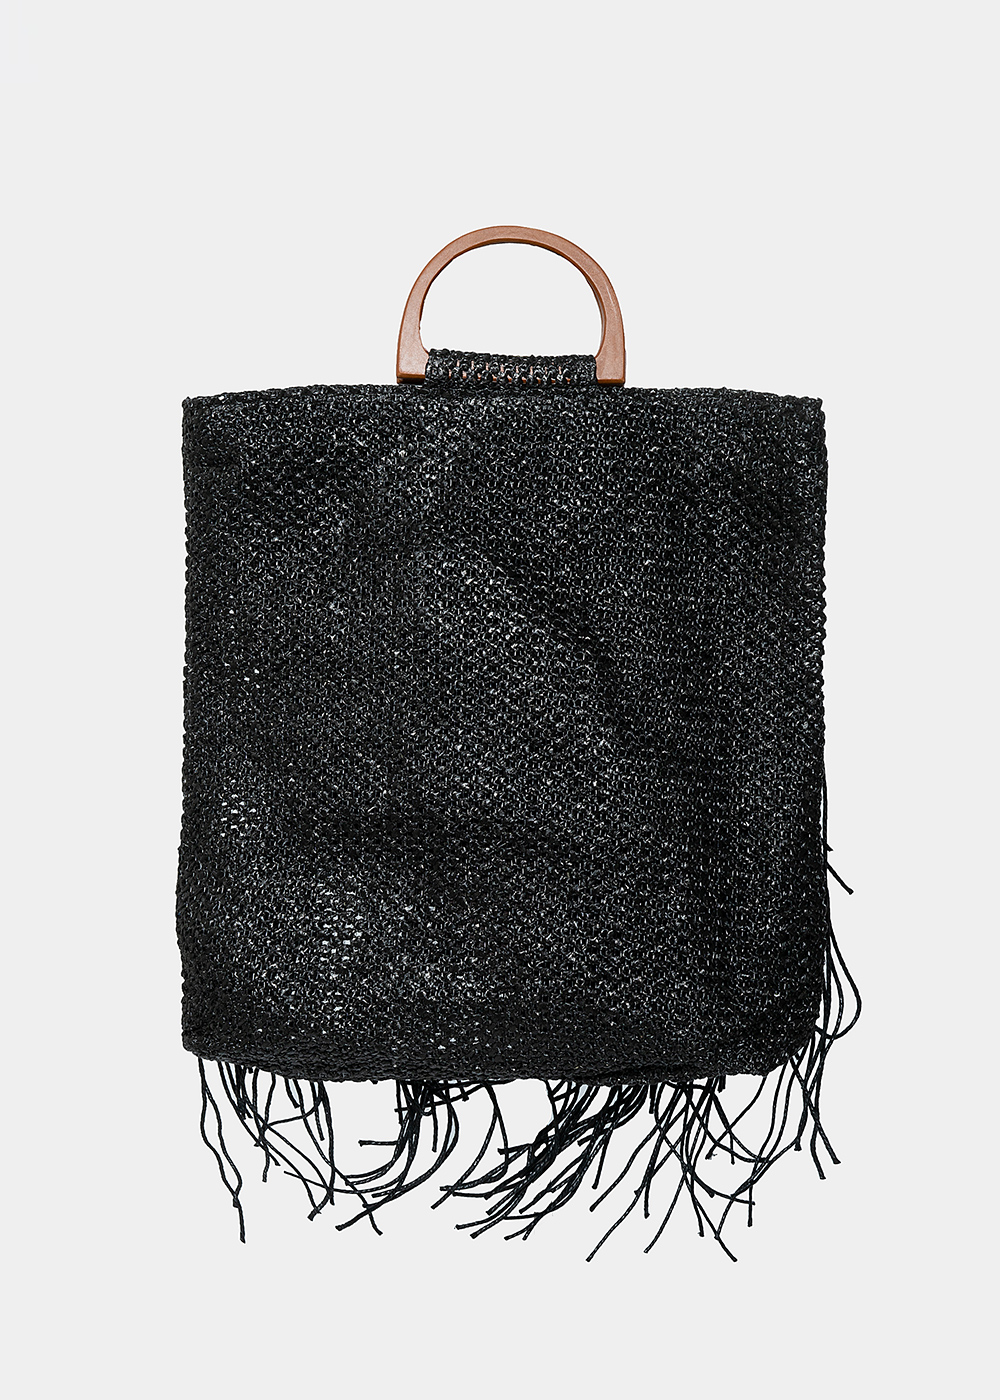 straw bag with fringes in black